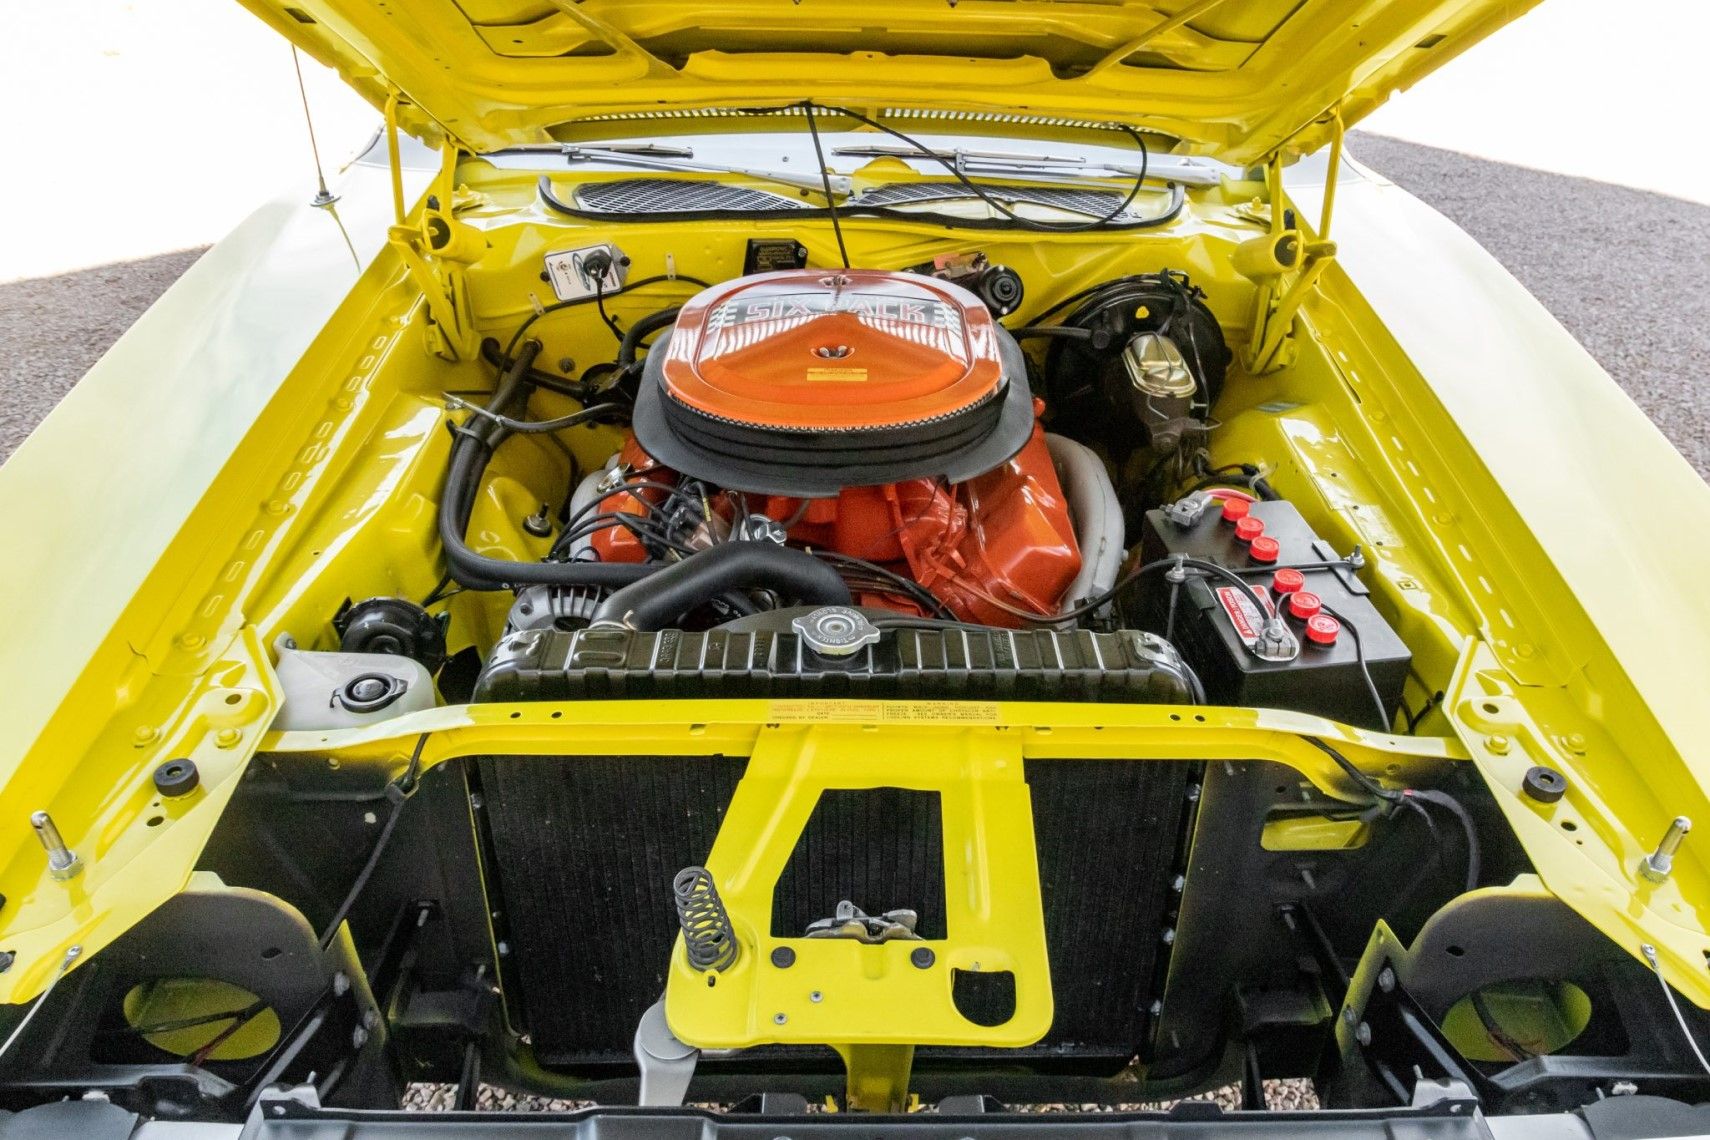 1971 Dodge Charger R/T engine bay view